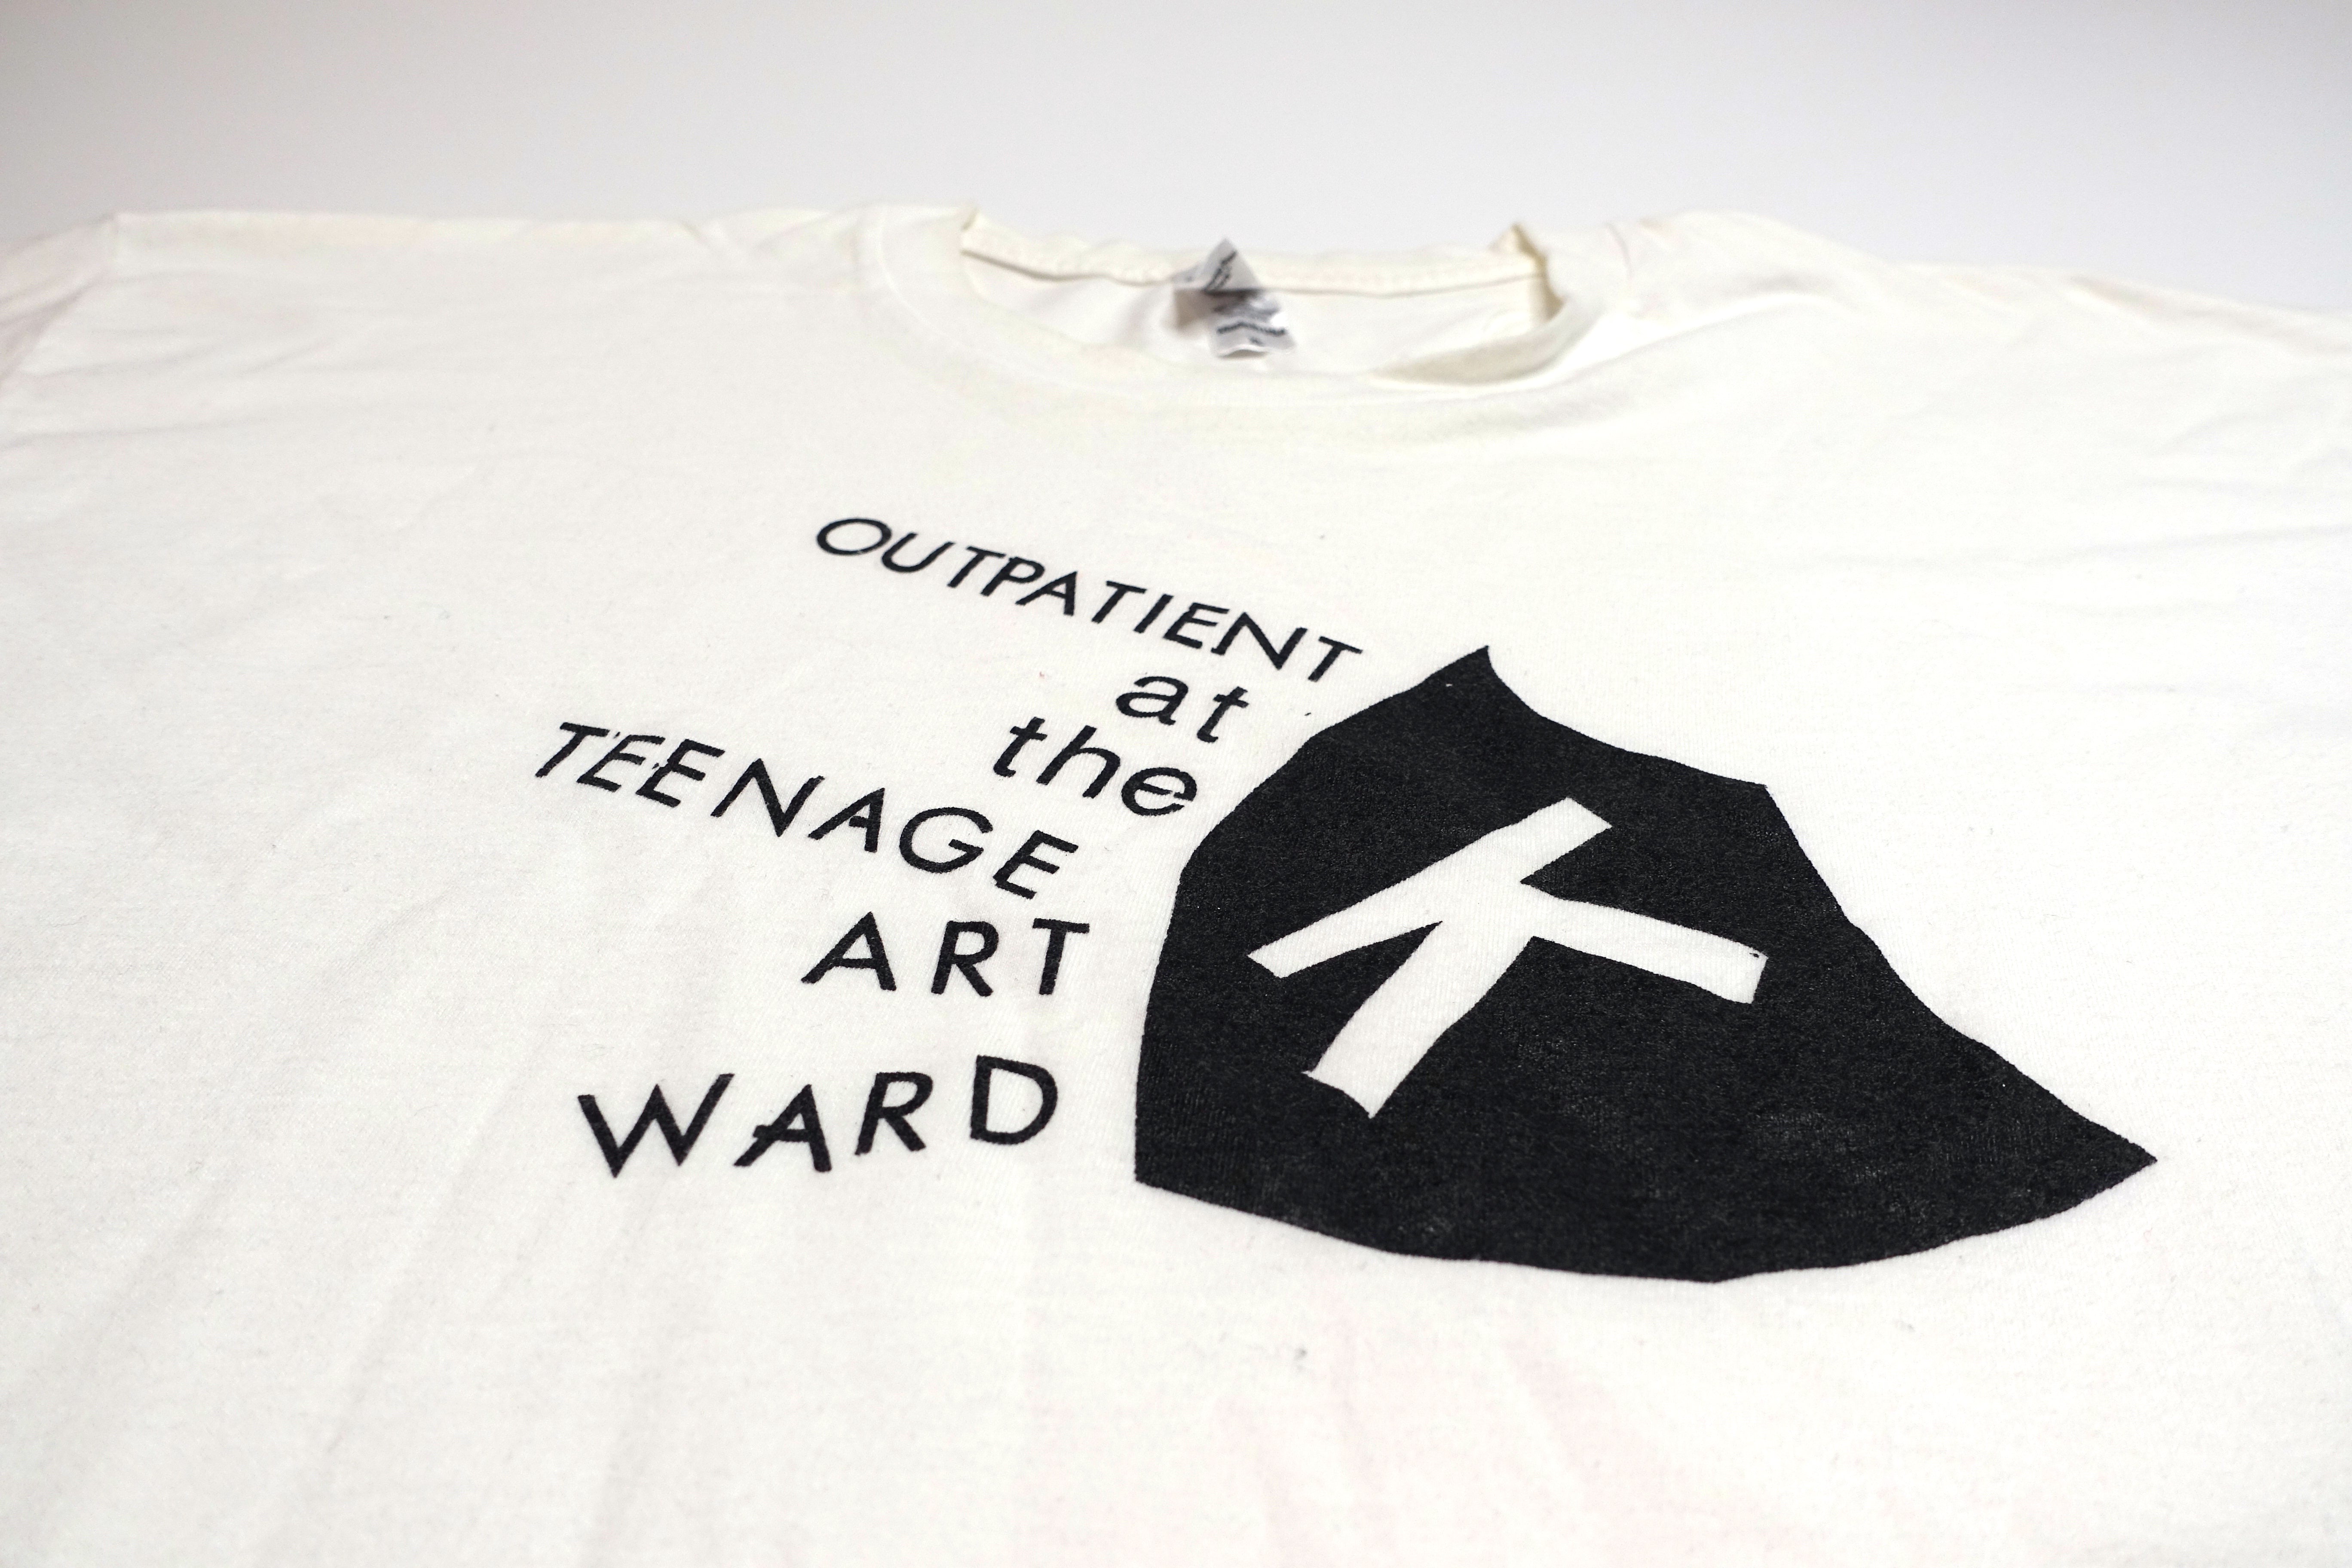 K Records - Outpatient At the Teenage Art Ward Mail Order Shirt Size XL